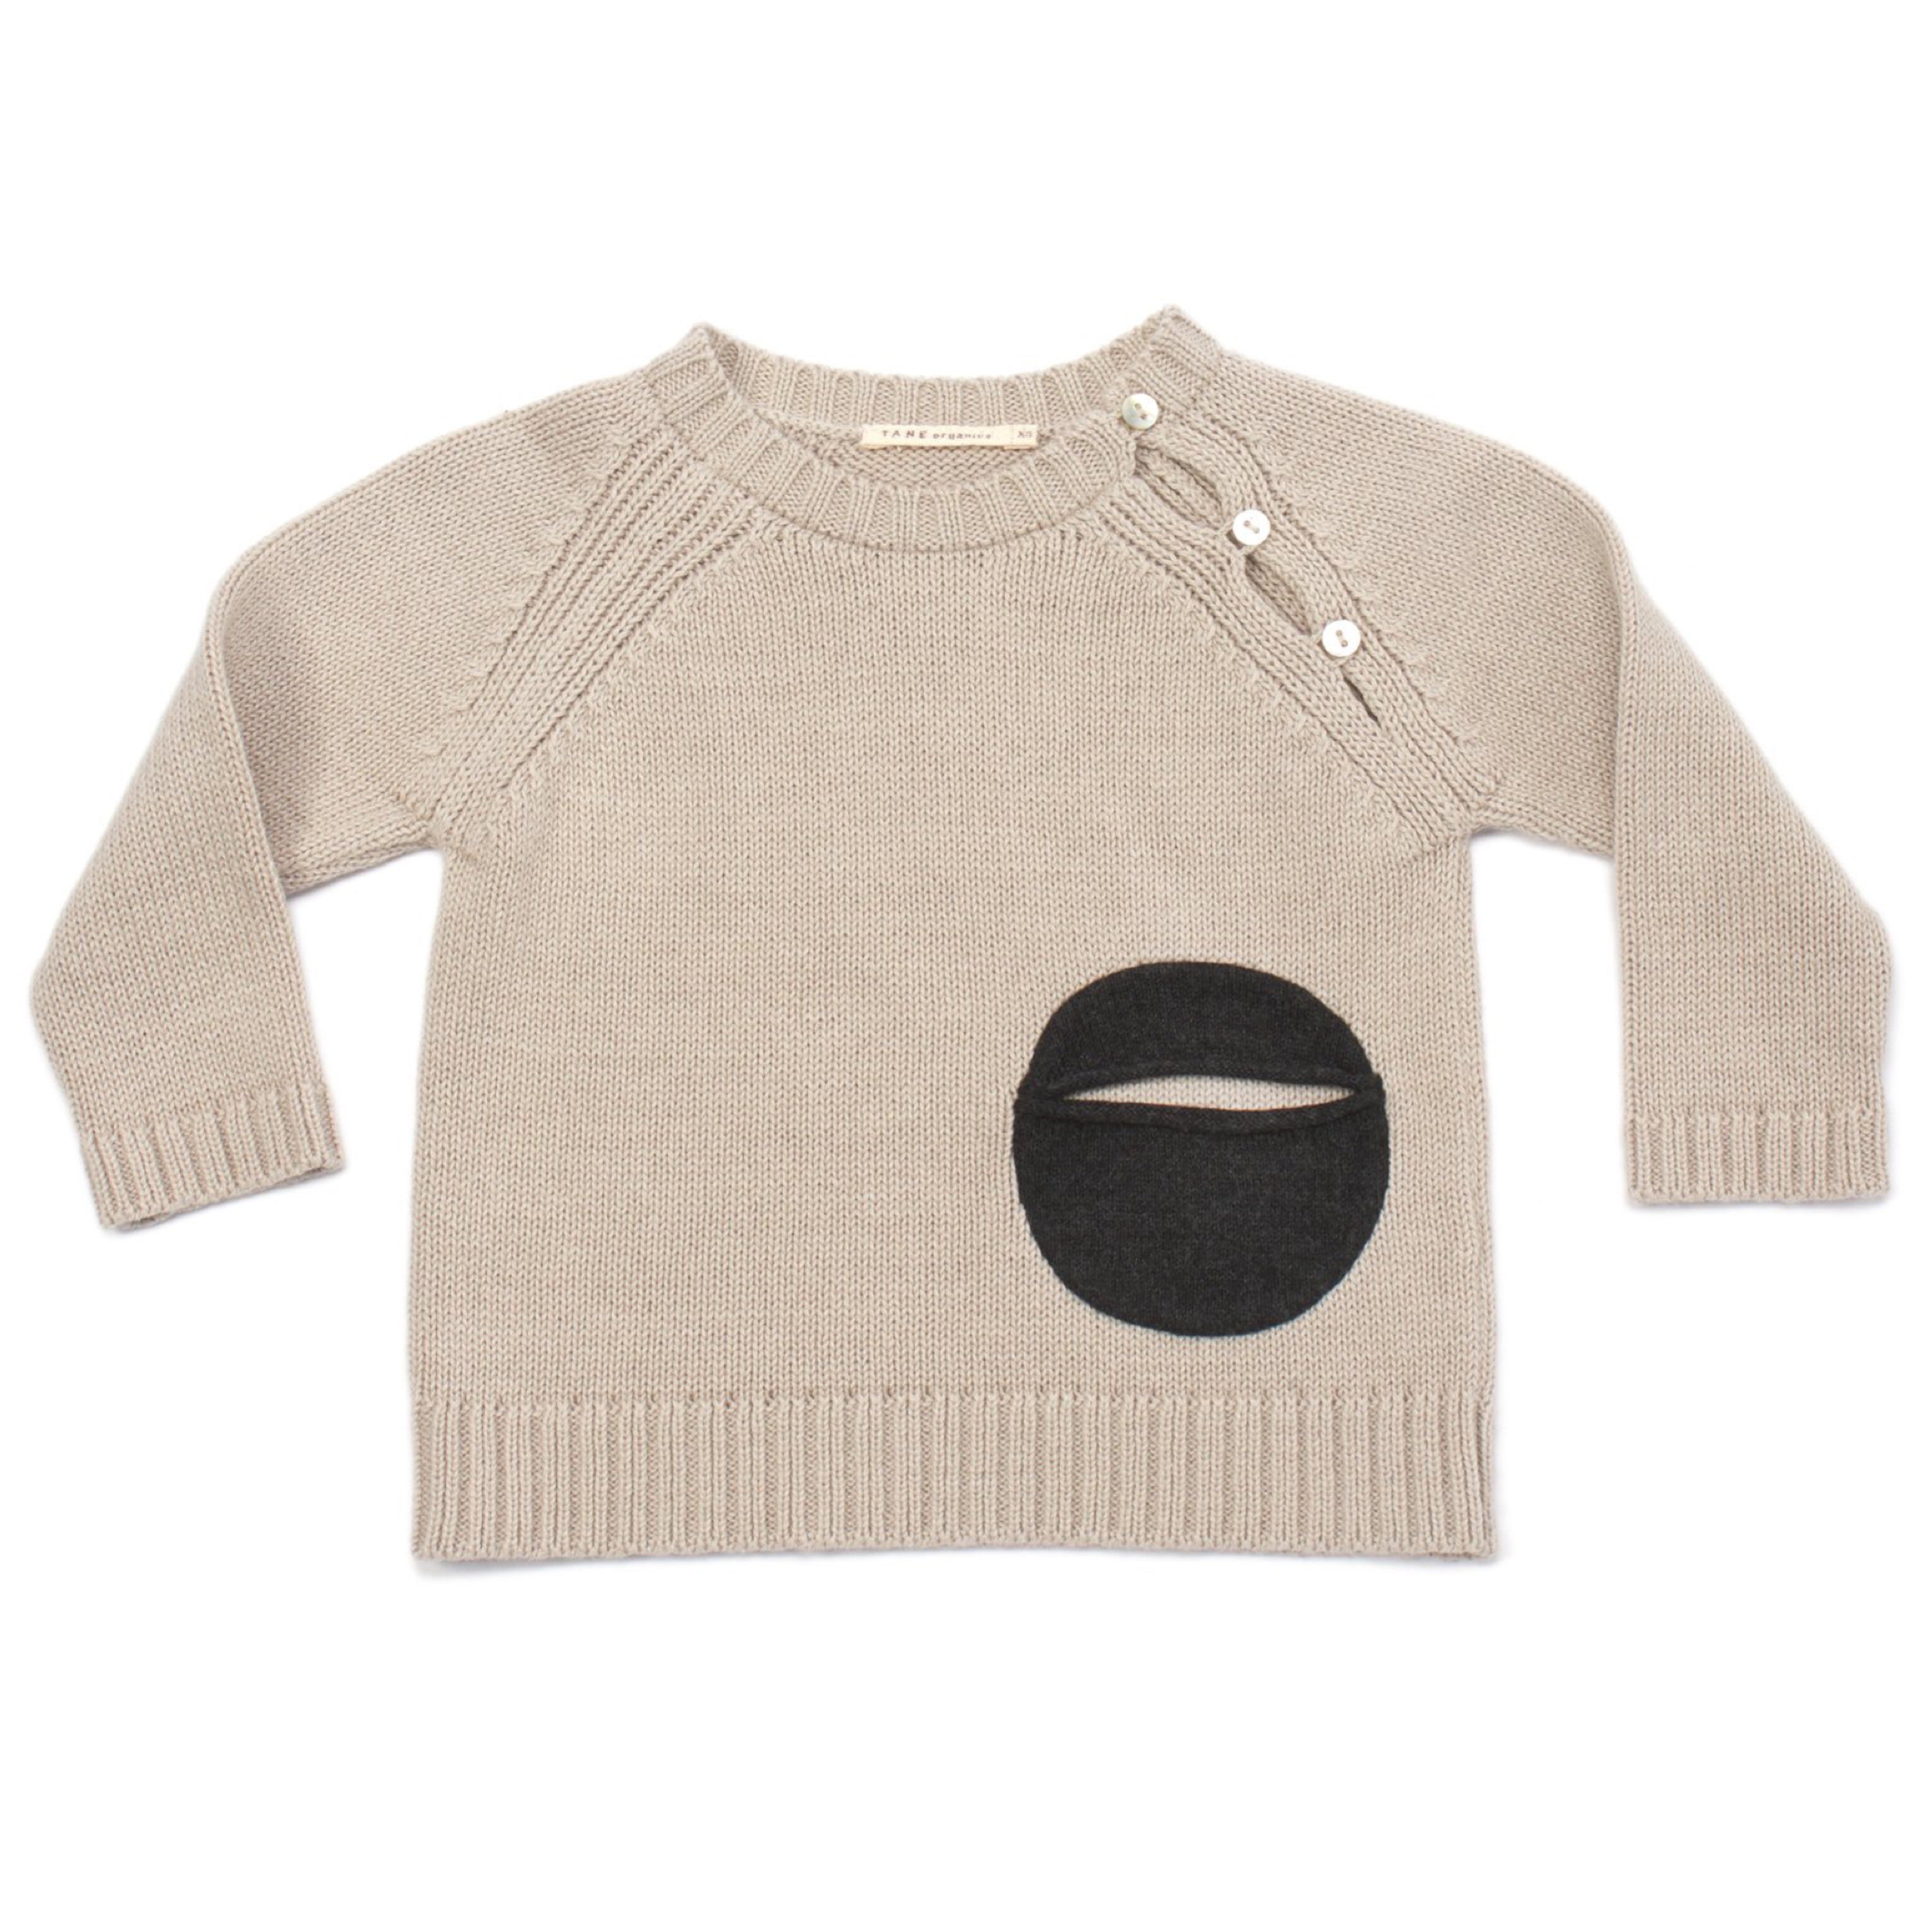 Sweater w/ Rounded Pocket